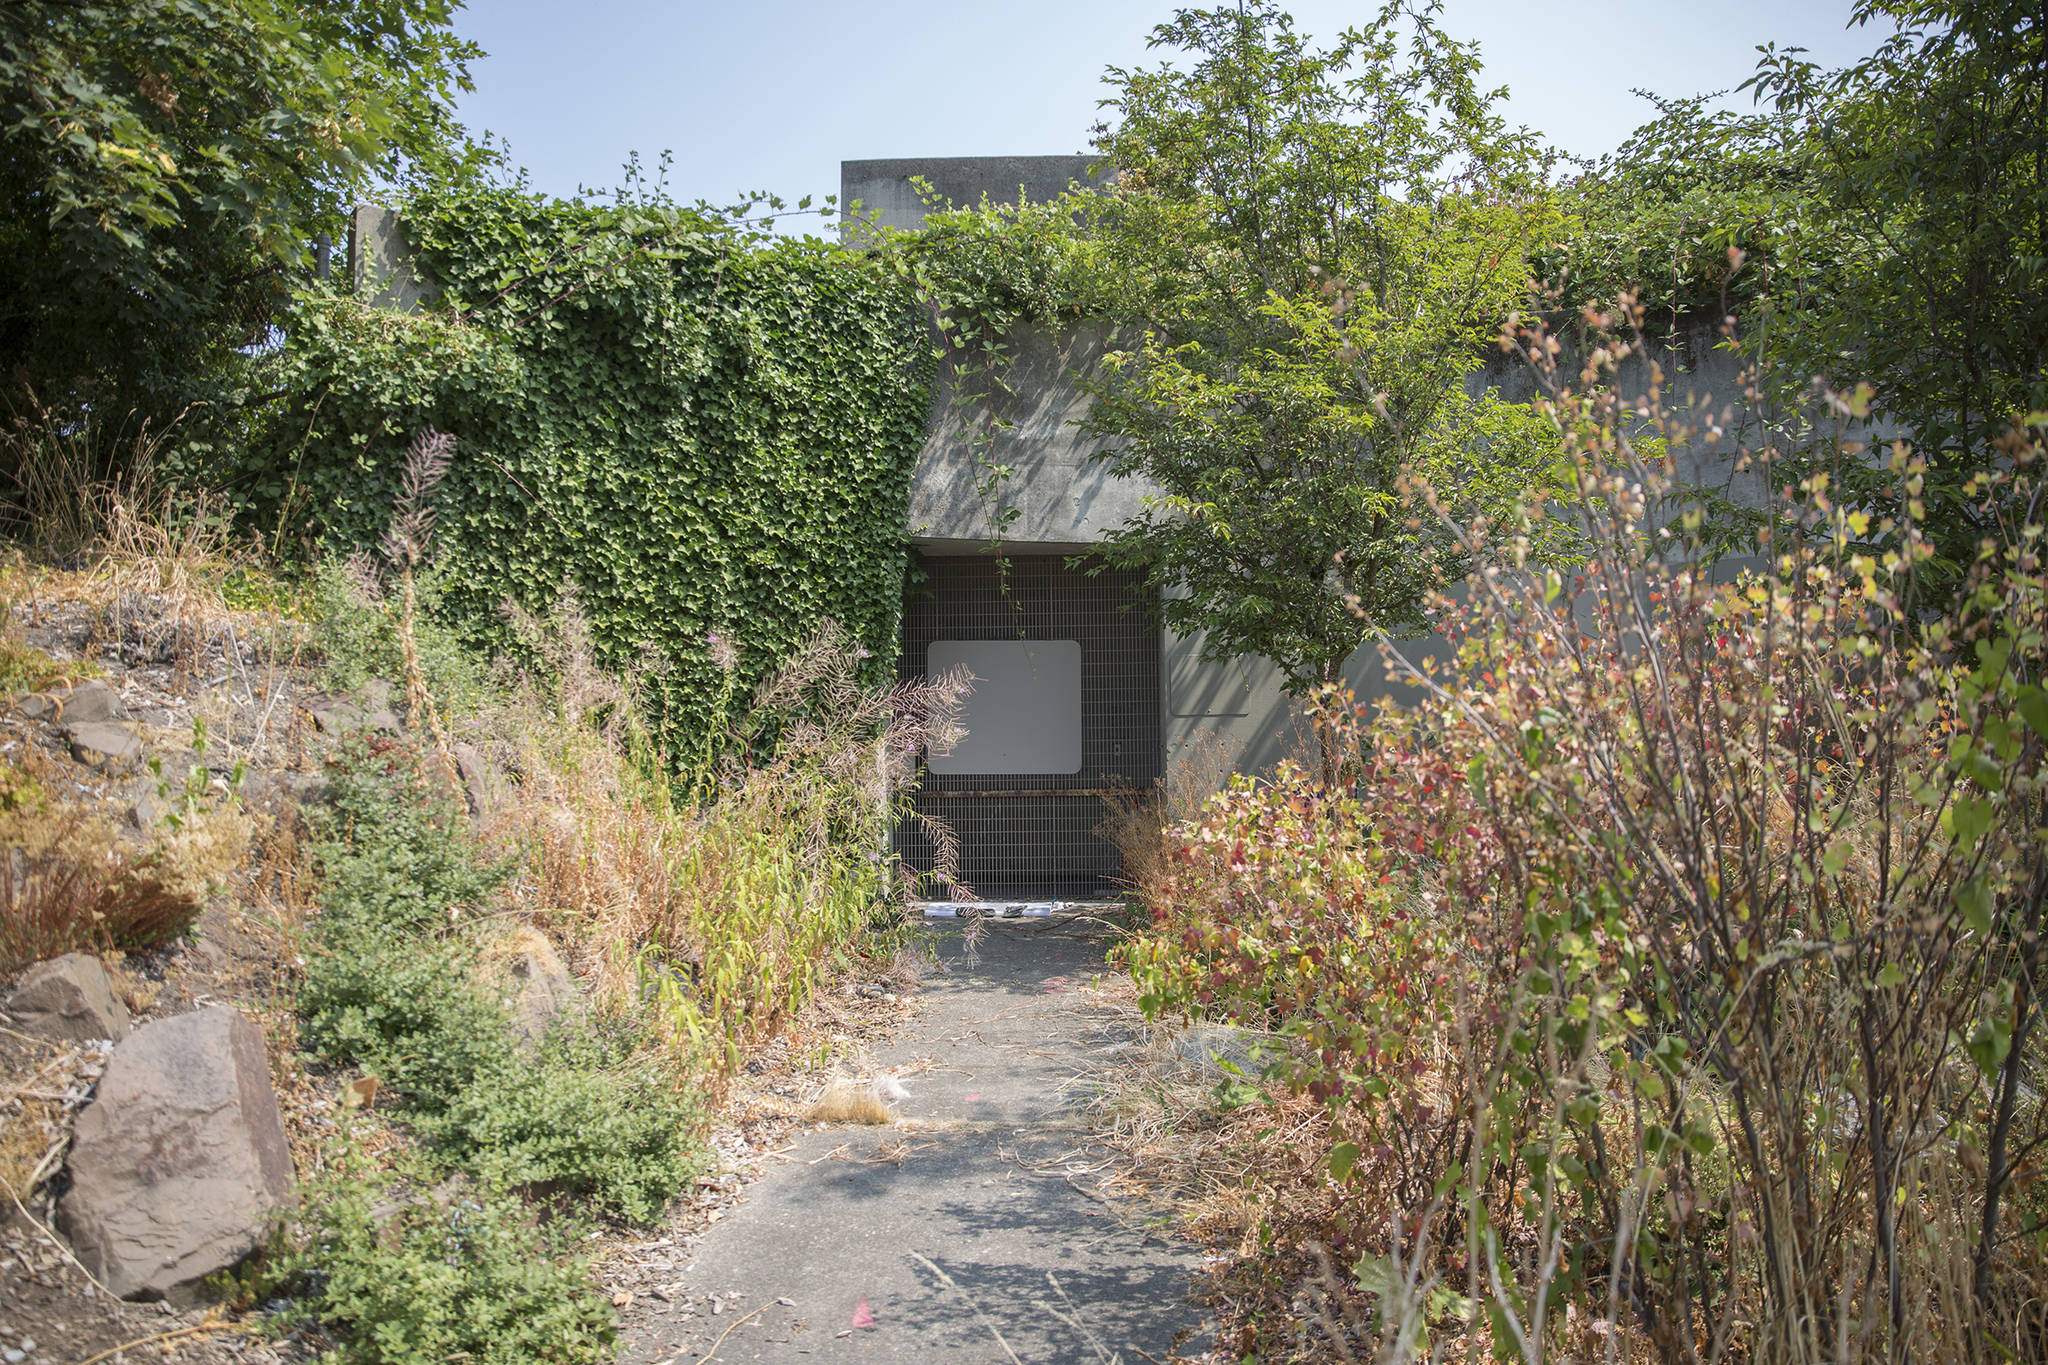 Officials intended to dot the American landscape with shelters like this one, located beneath I-5 at the north end of the Ravenna Park Bridge. It never happened. Experts now believe the structure may have done little to protect its inhabitants.